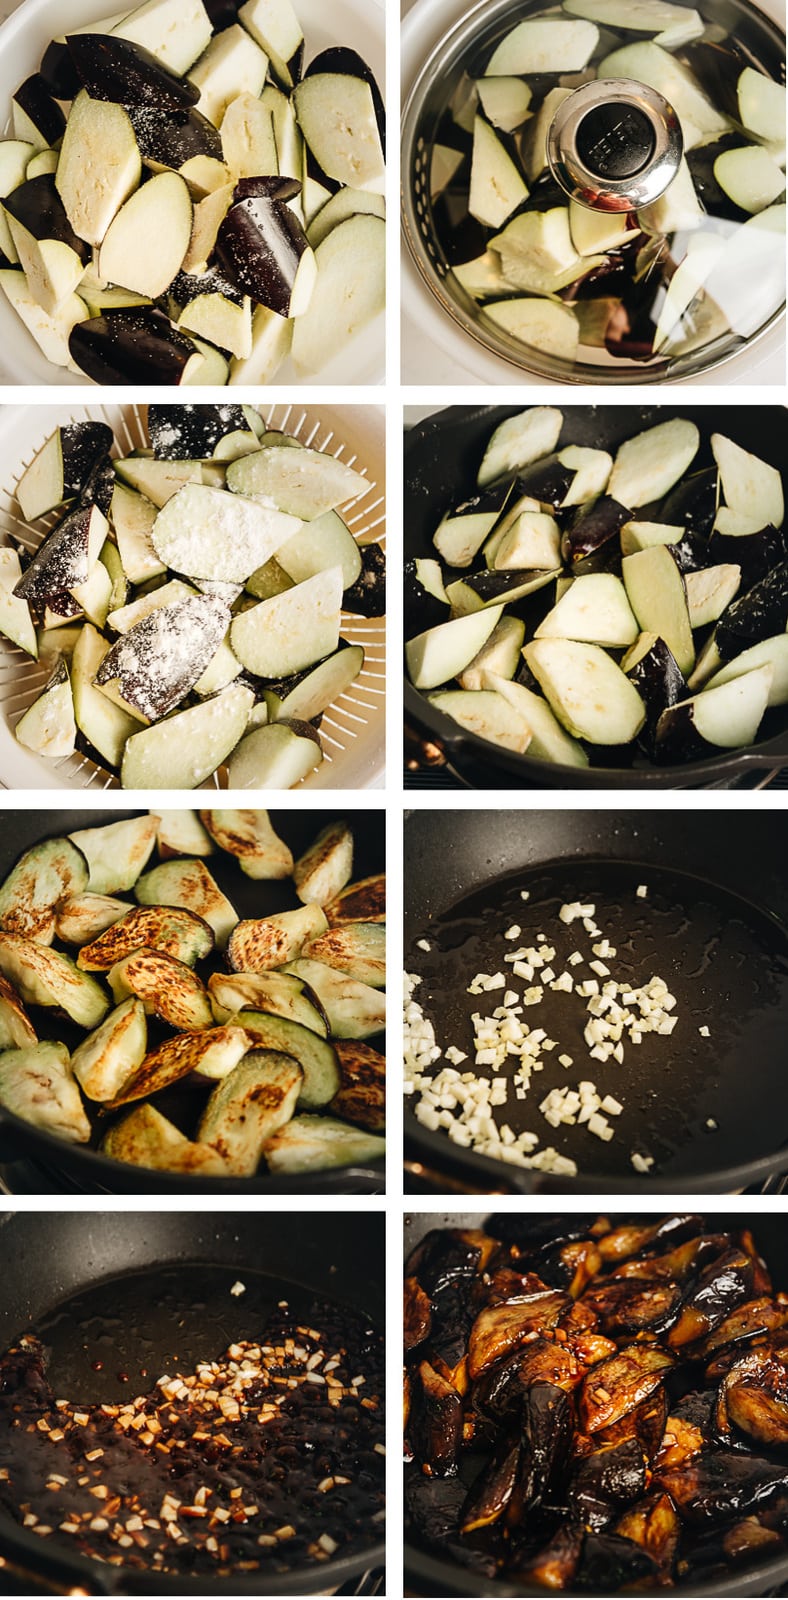 Home made Chinese eggplant cooking step by step